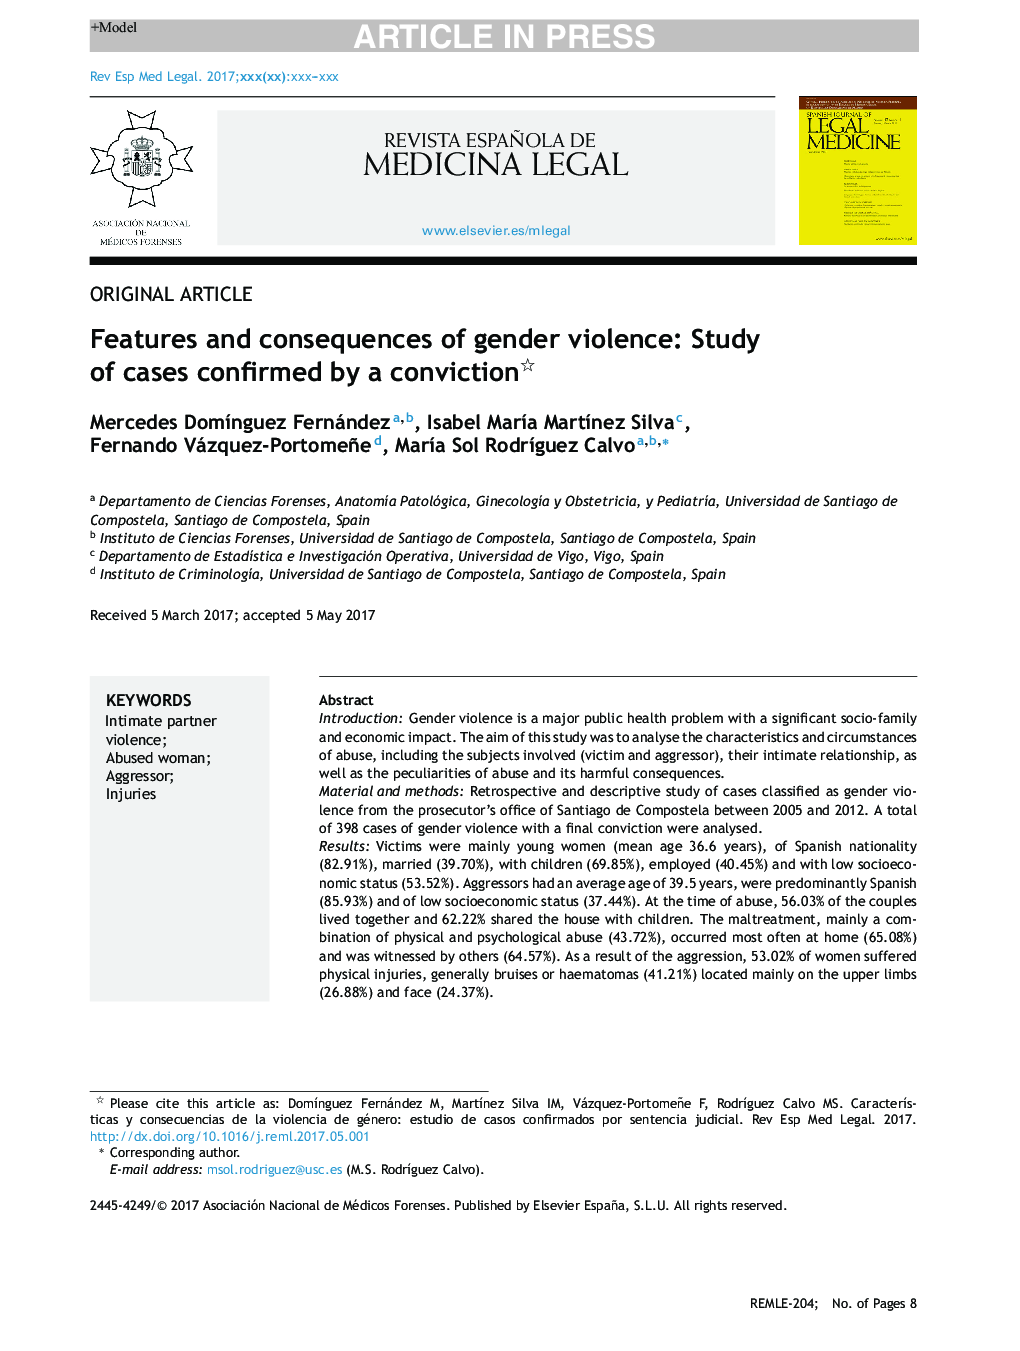 Features and consequences of gender violence: Study of cases confirmed by a conviction